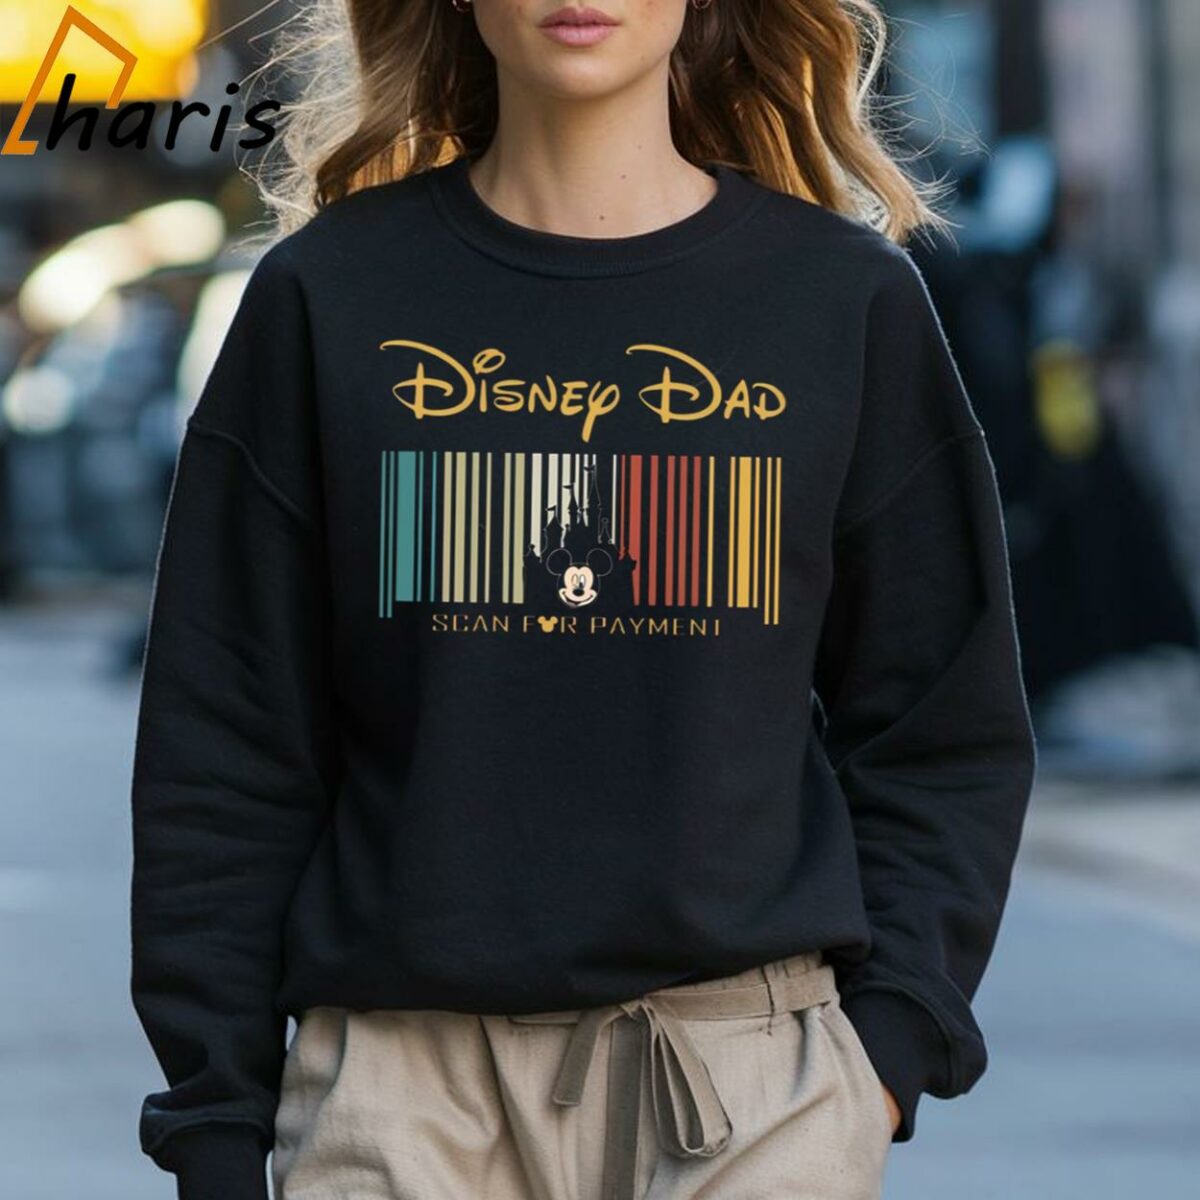 Mickey Mouse Scan For Payment Disney Dad Shirt 3 Sweatshirt